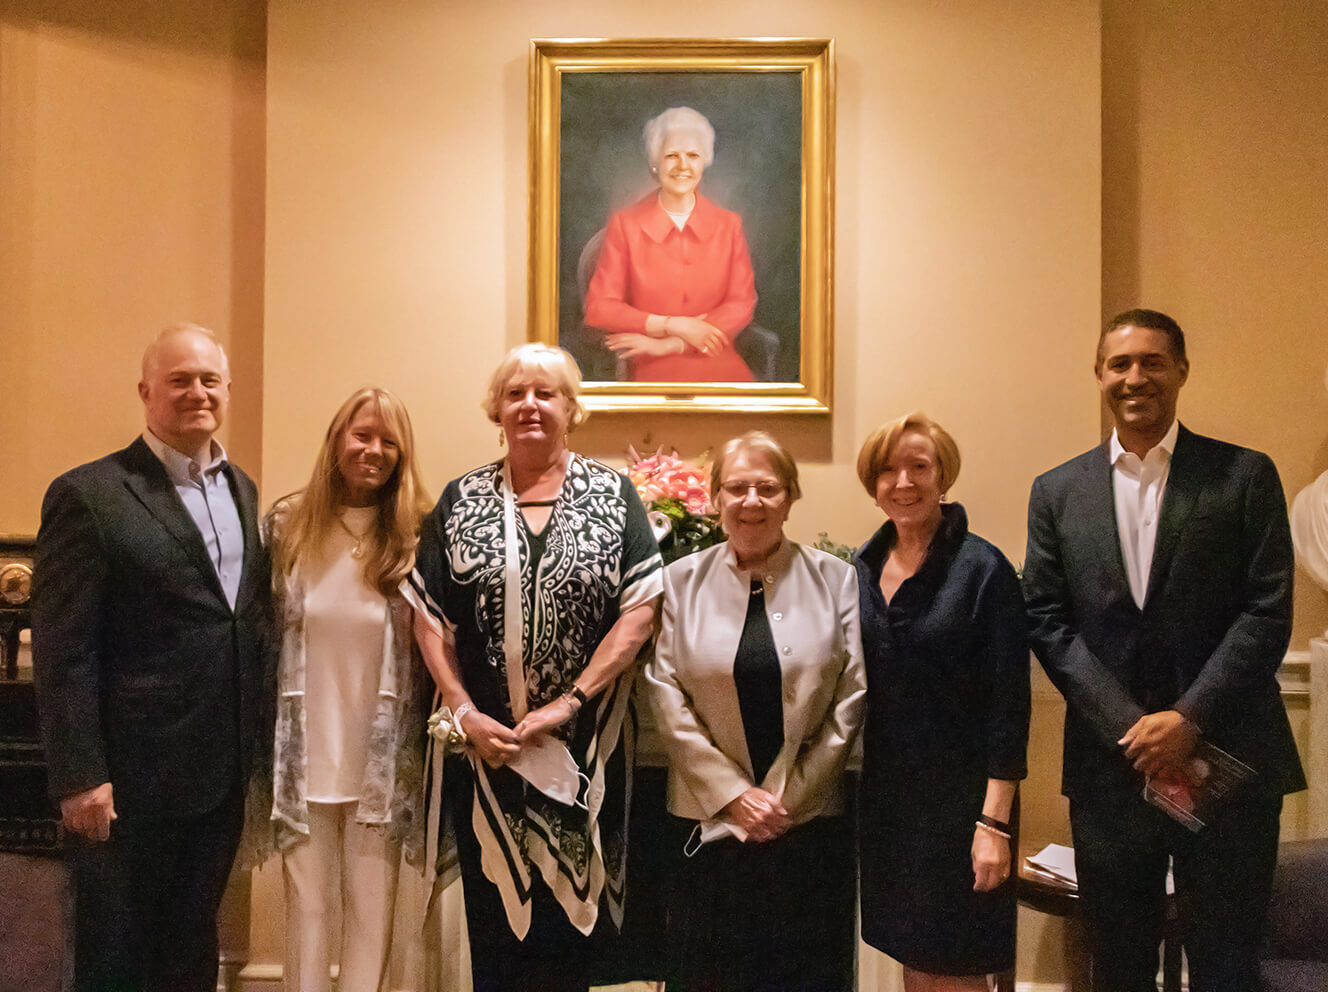 Pictured with the Ruth Sleeper portrait in the newly renamed suite are, left to right, David F. M. Brown, MD, Leslie and Linda Siegel, Roberta Nemeskal, RN, Debbie Burke, RN, DNP, MBA, NEA-BC, and William Curry, MD.